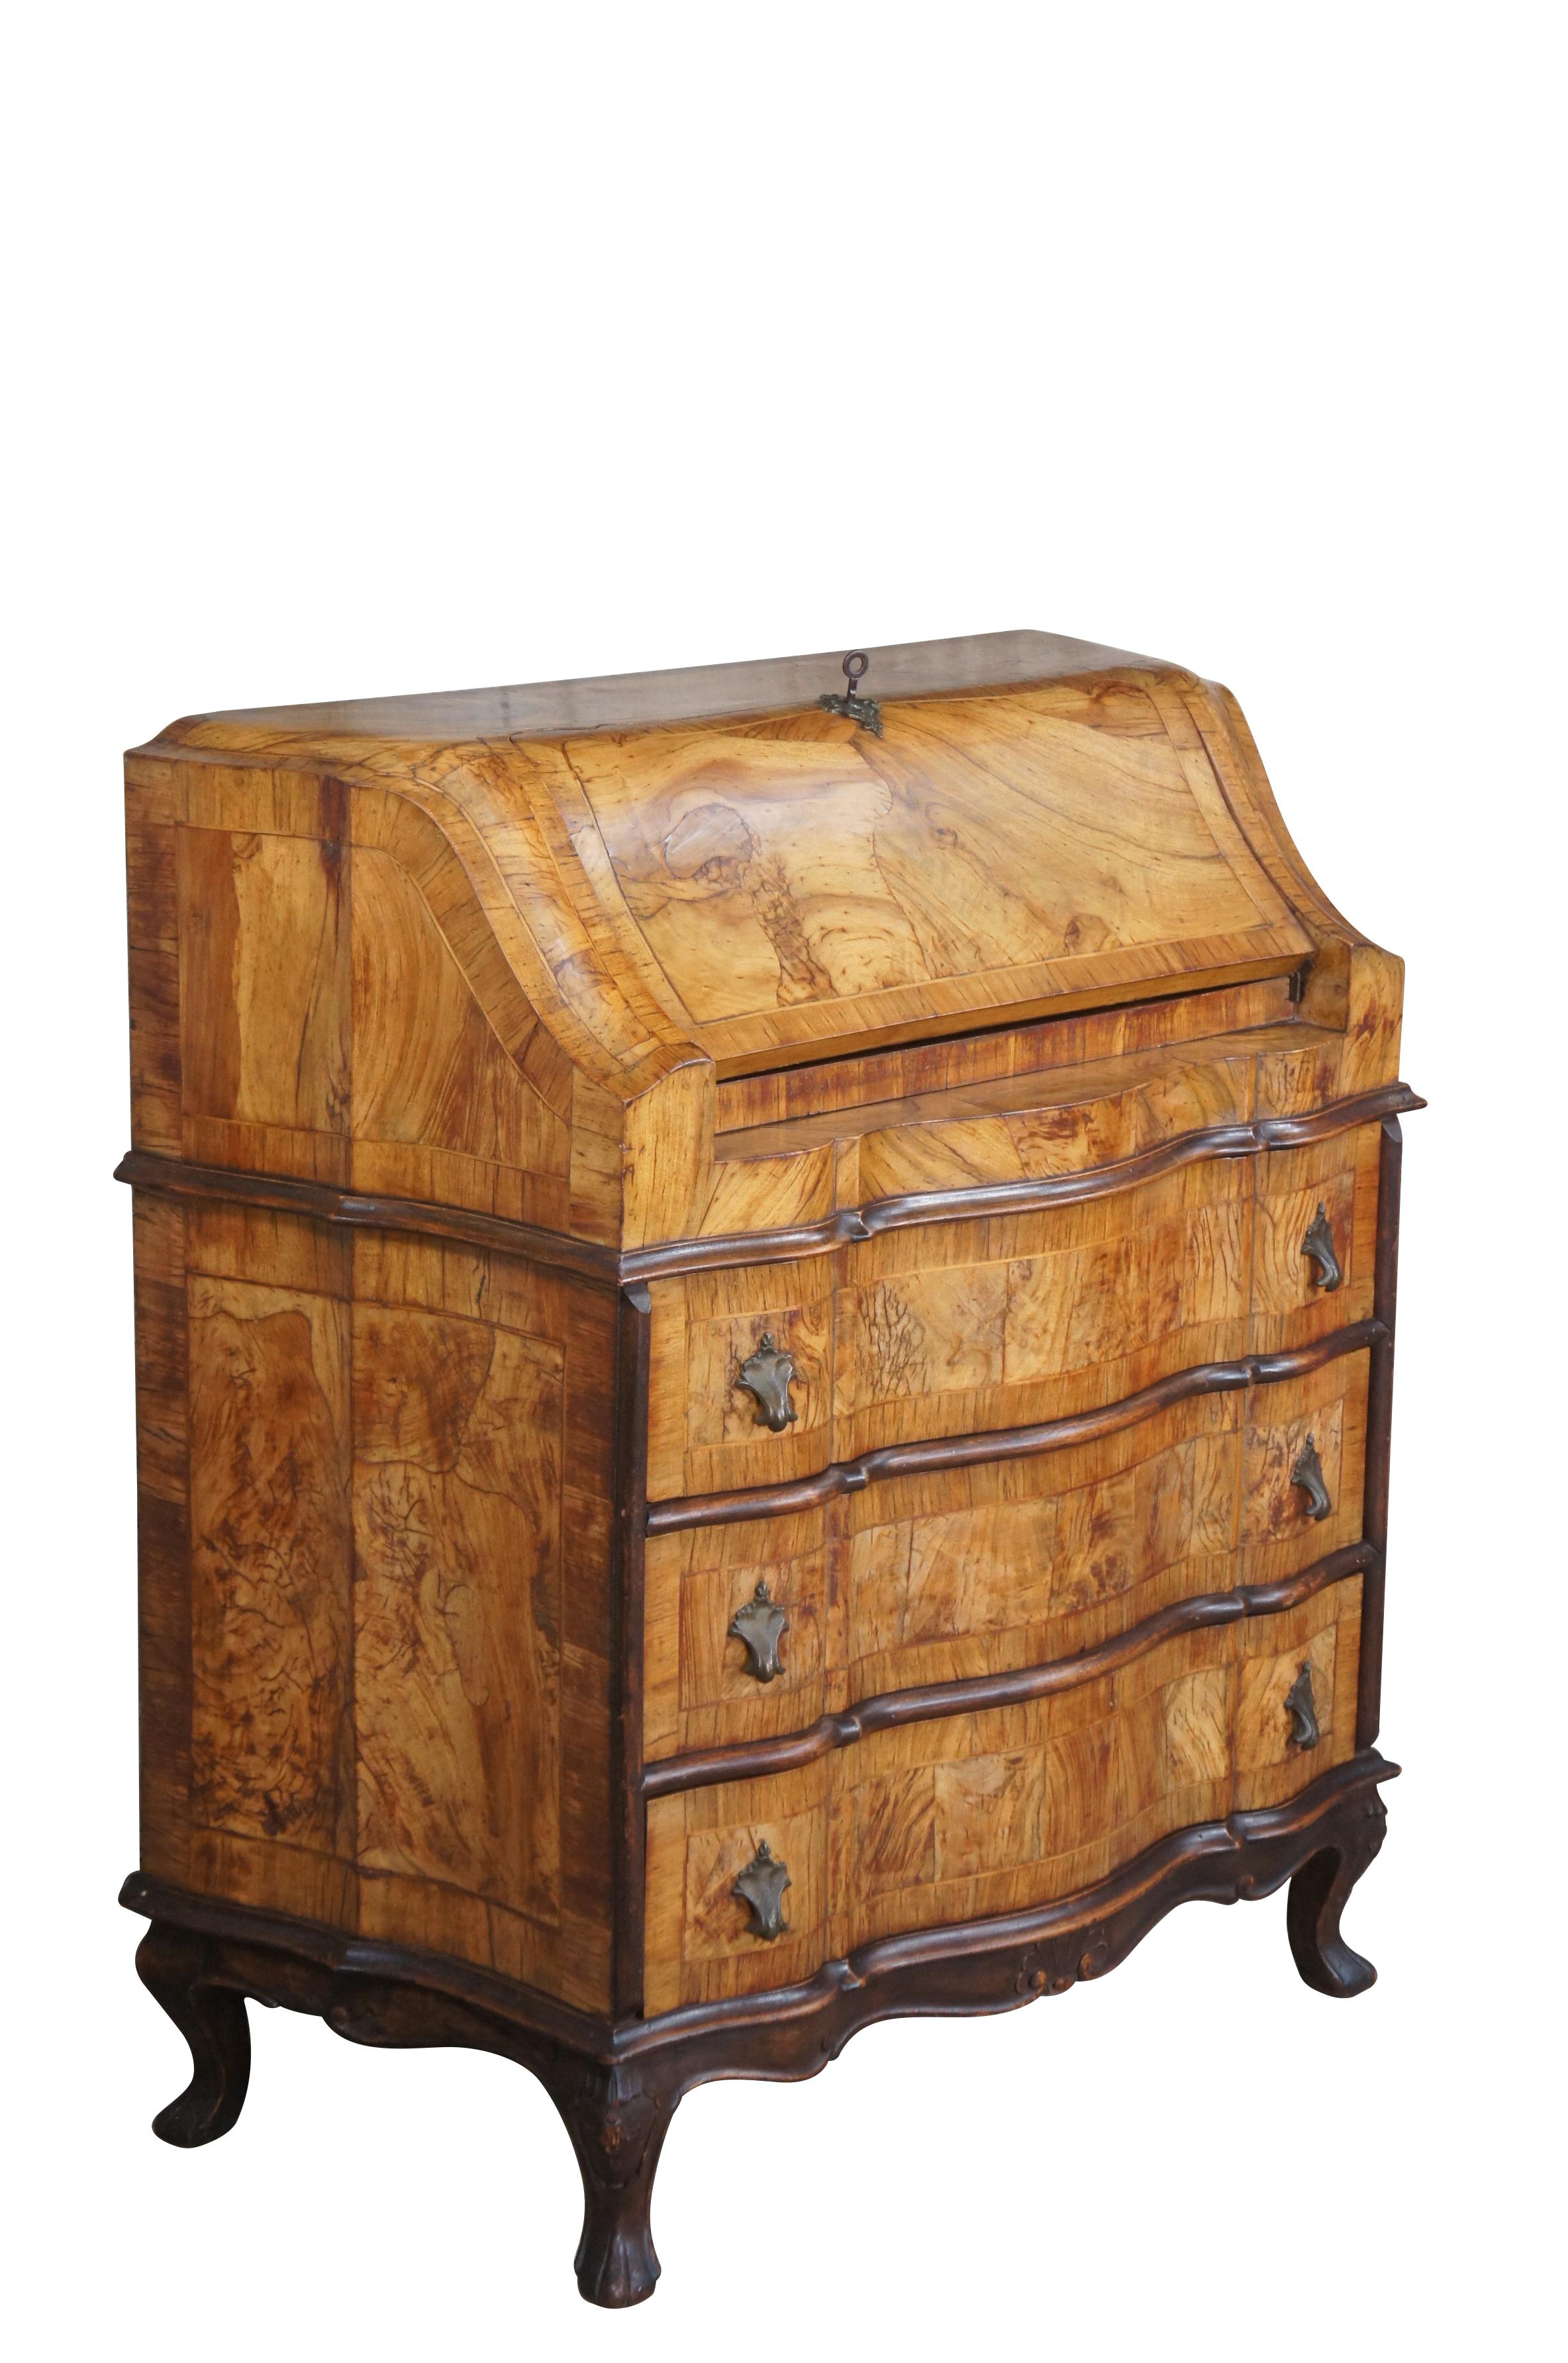 An impressive antique Italian Venetian drop front secretary desk.  Made from olive burl with a downswept lid and serpentine frame. Each panel shows off exquisite burl and shapely cross banding.  The unique writing surface opens to 4 drawers and a